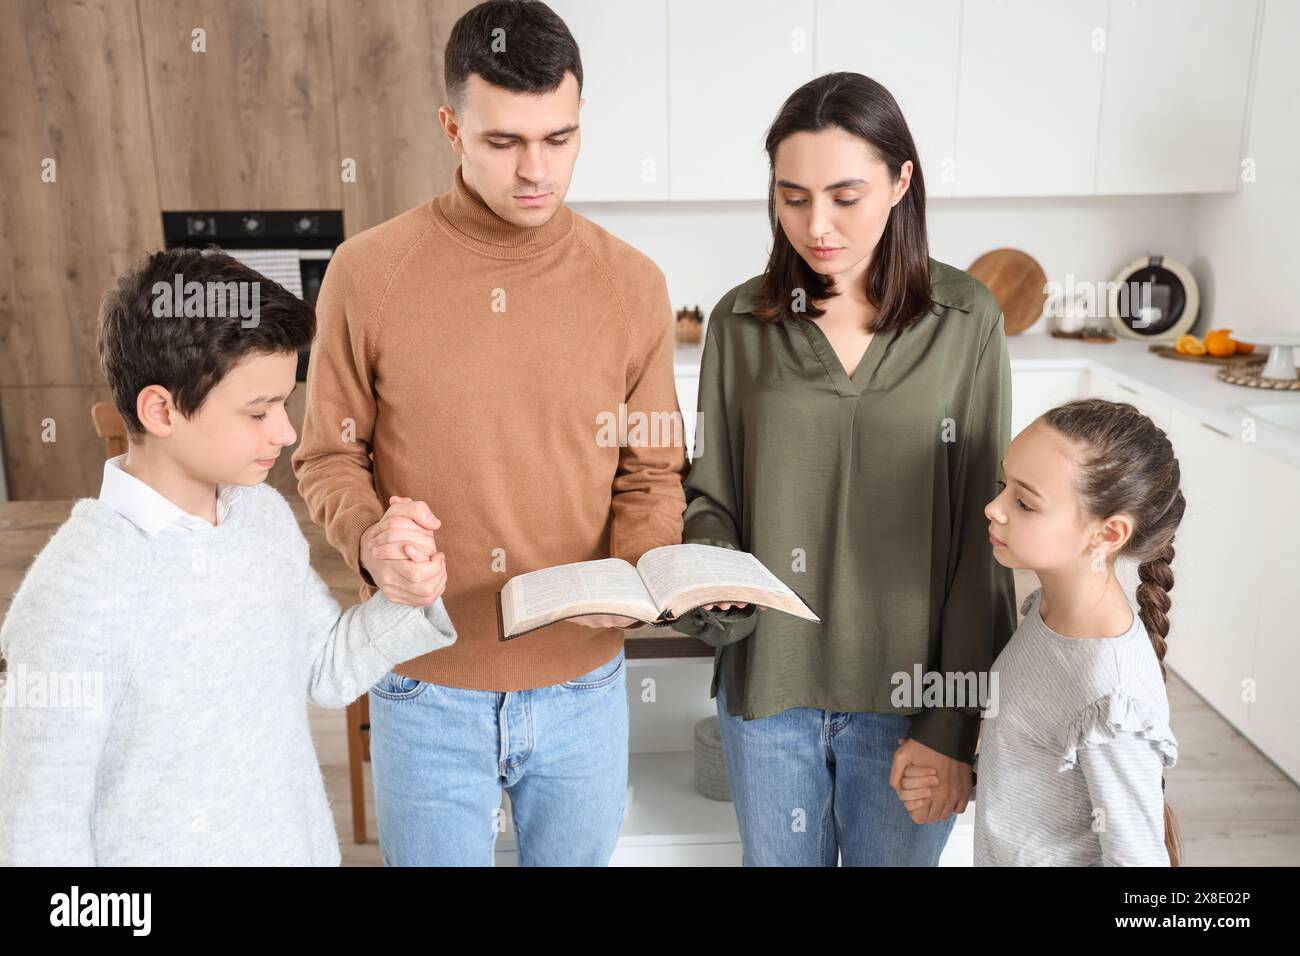 Family with Holy Bible praying together in kitchen Stock Photo